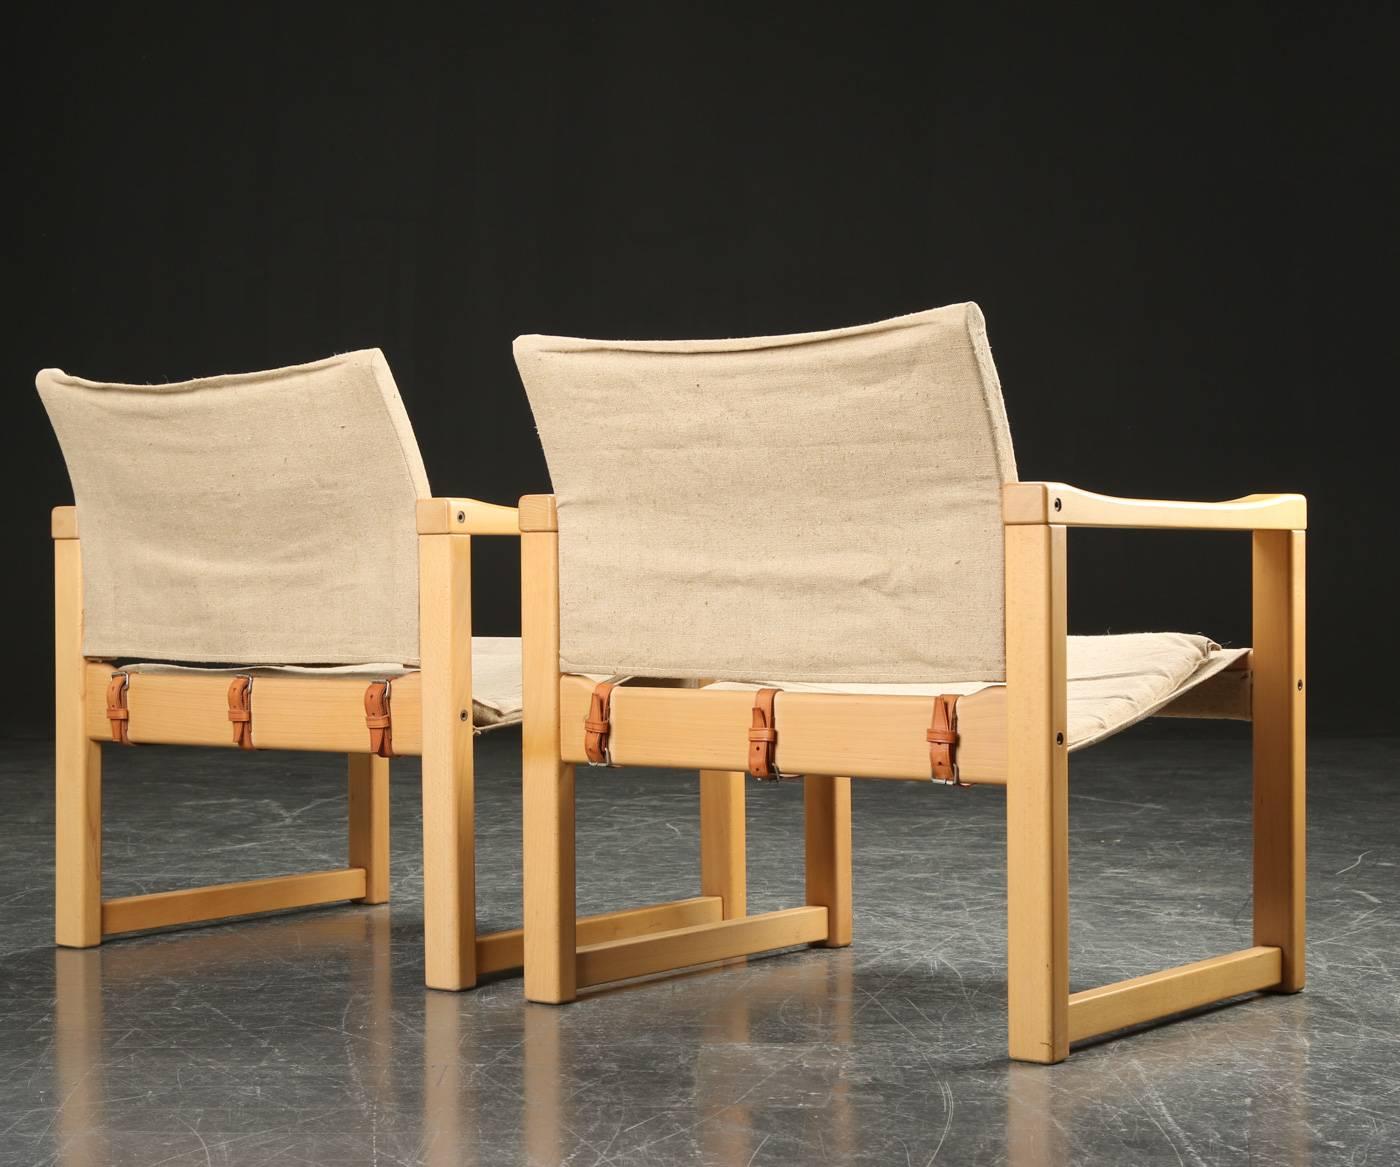 Safari style beech armchairs in Linen seats/backs/cushions with leather straps by Karin Mobring for Olaio Portugal, model 